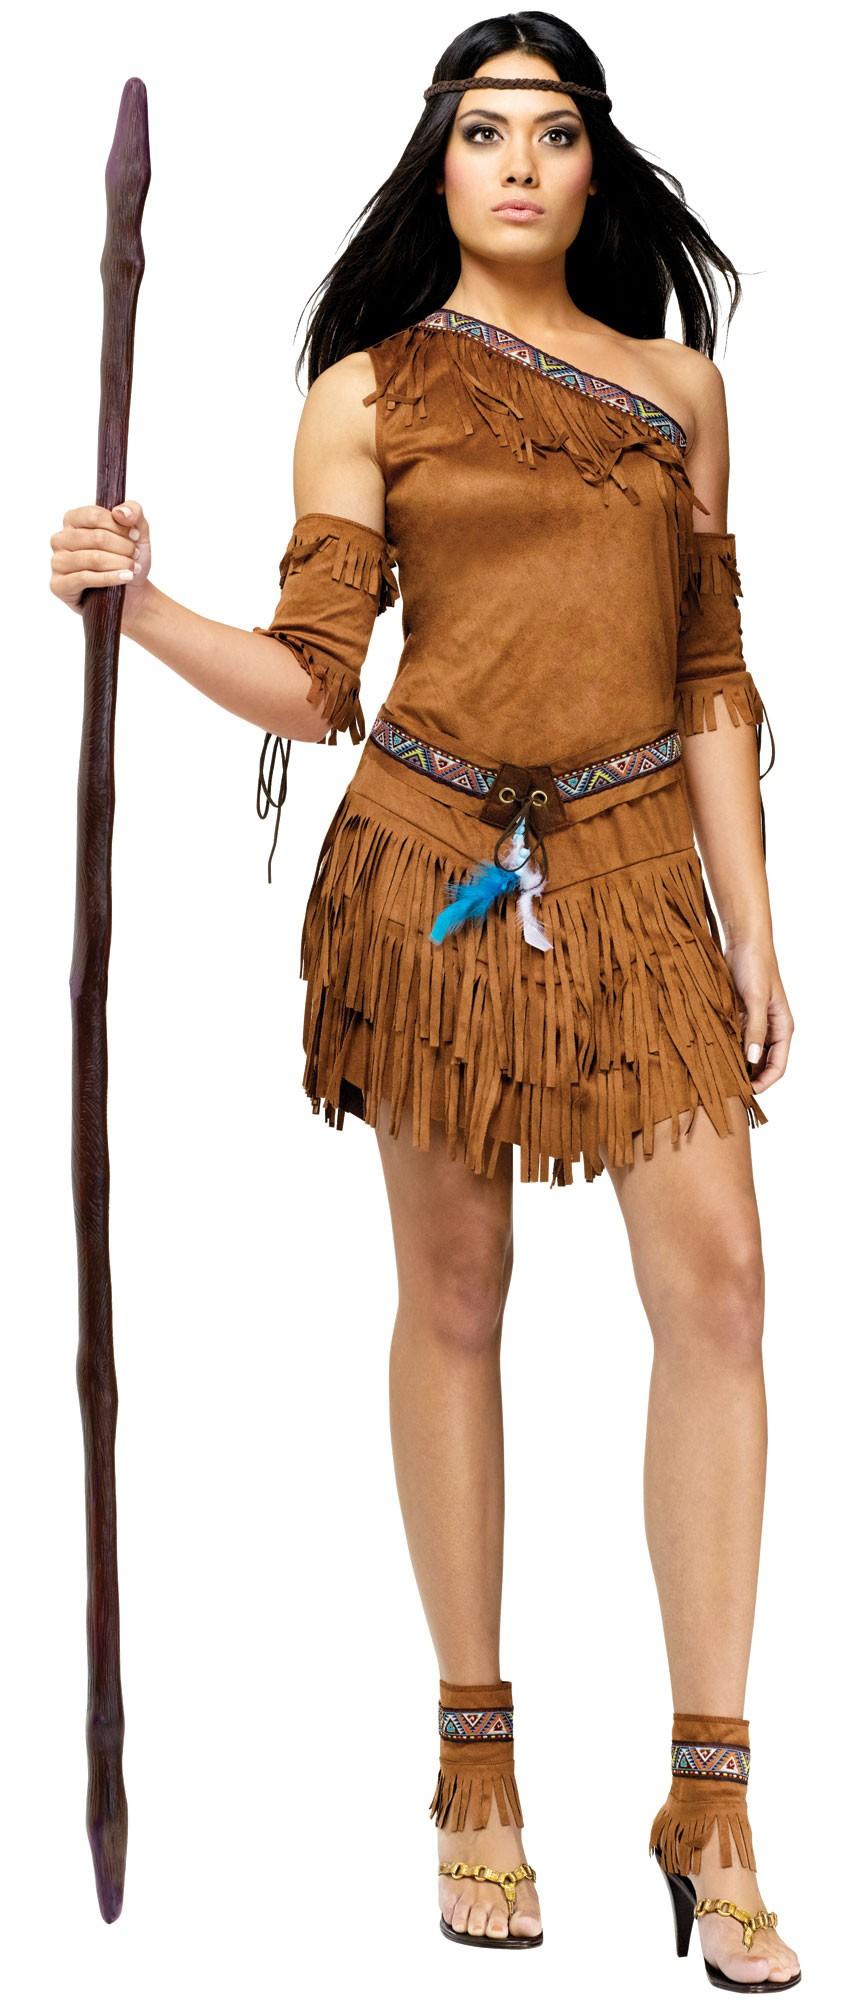 Best of Sexy native american costume